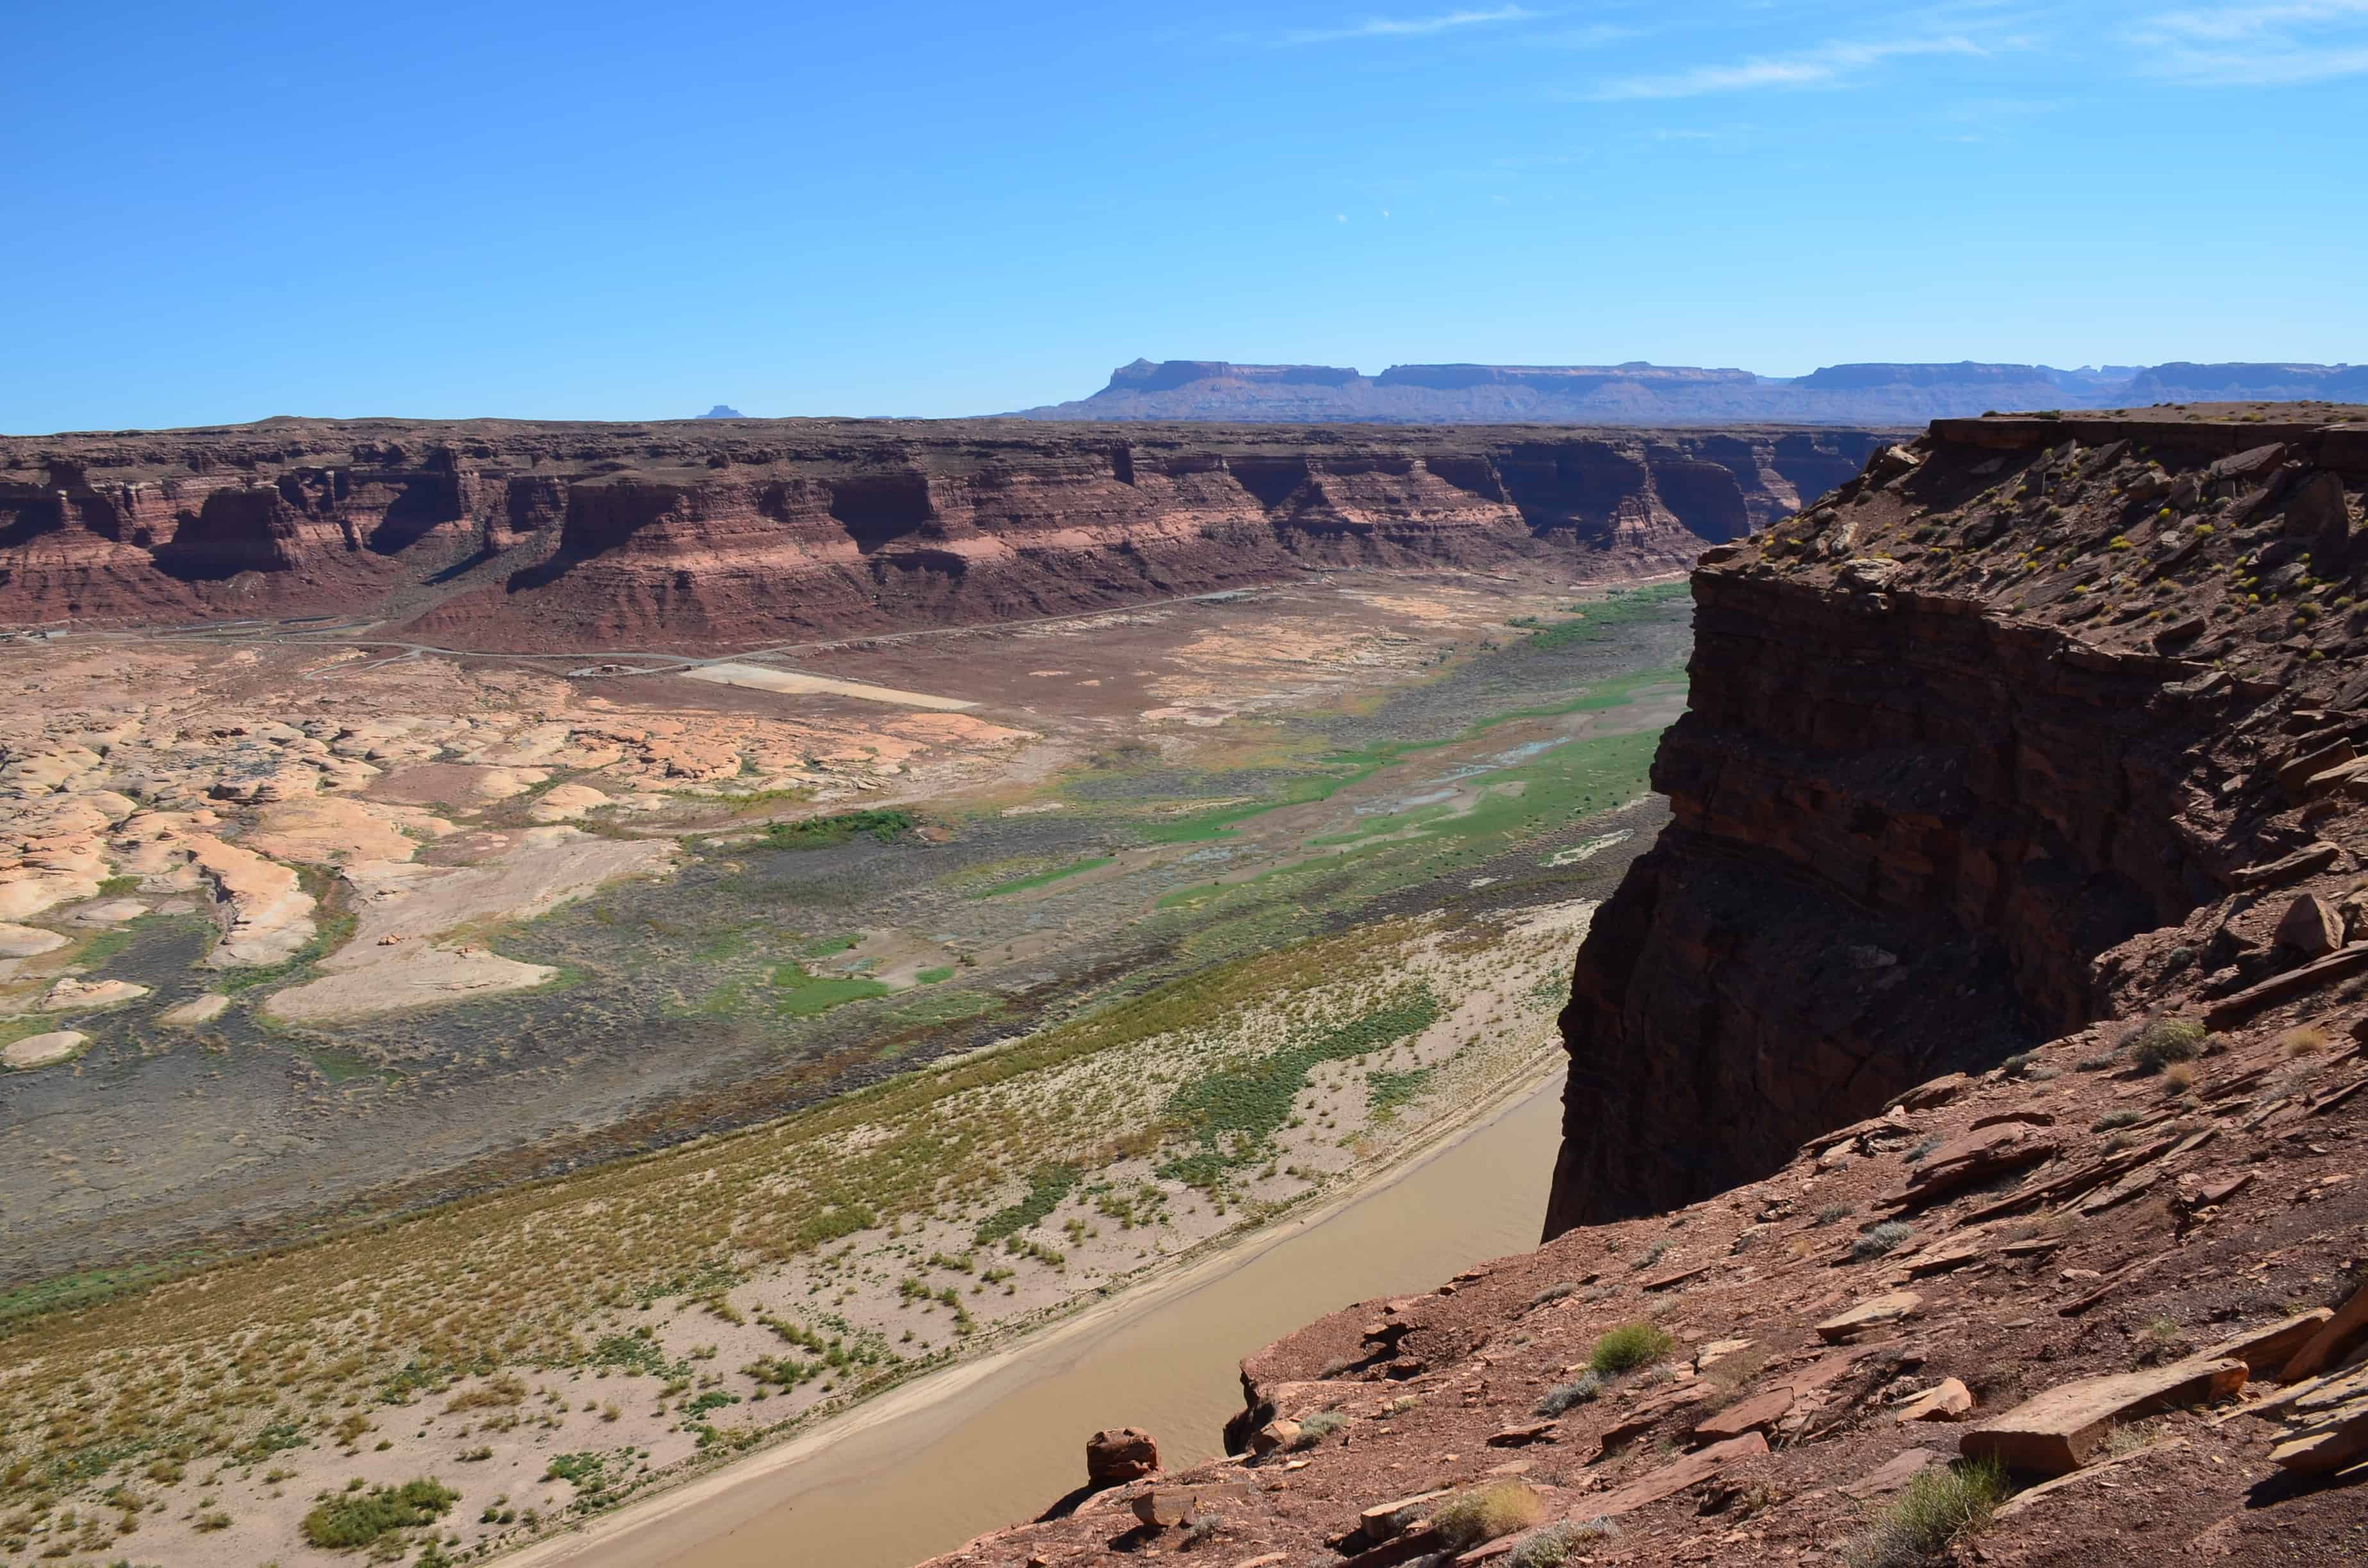 View from Hite Overlook at Glen Canyon National Recreation Area in Utah